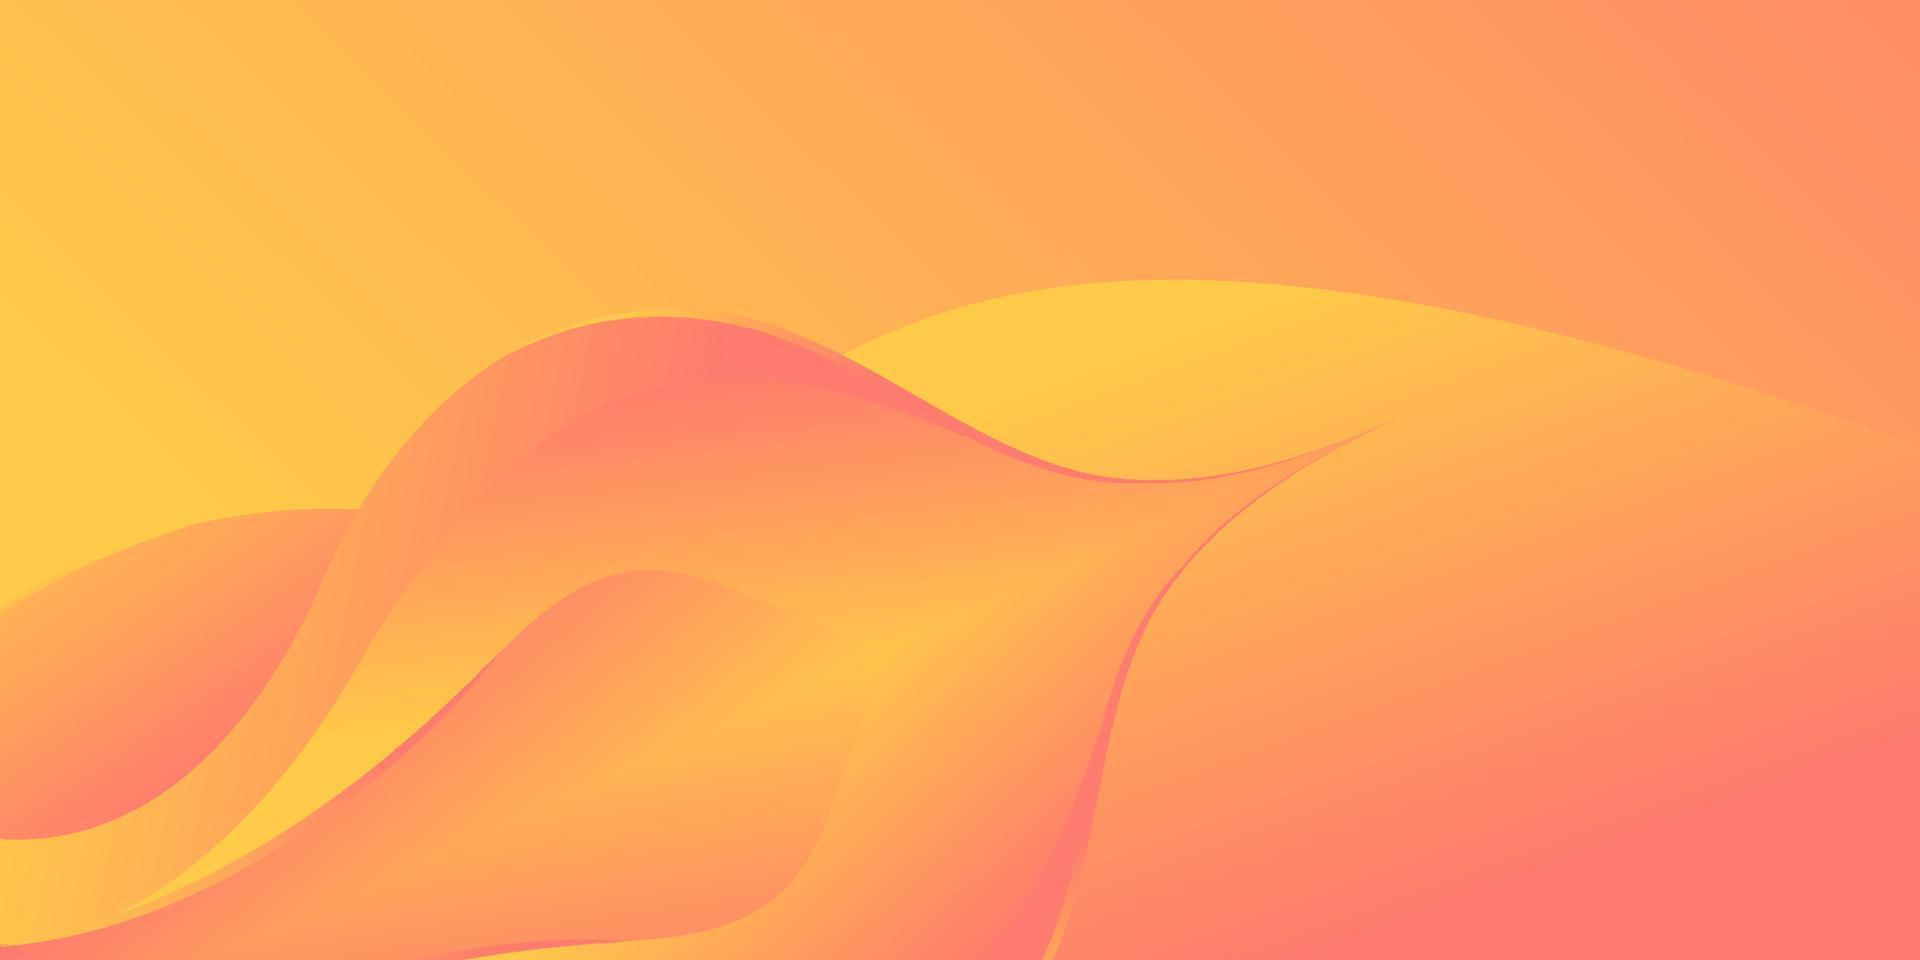 abstract background with waves vector